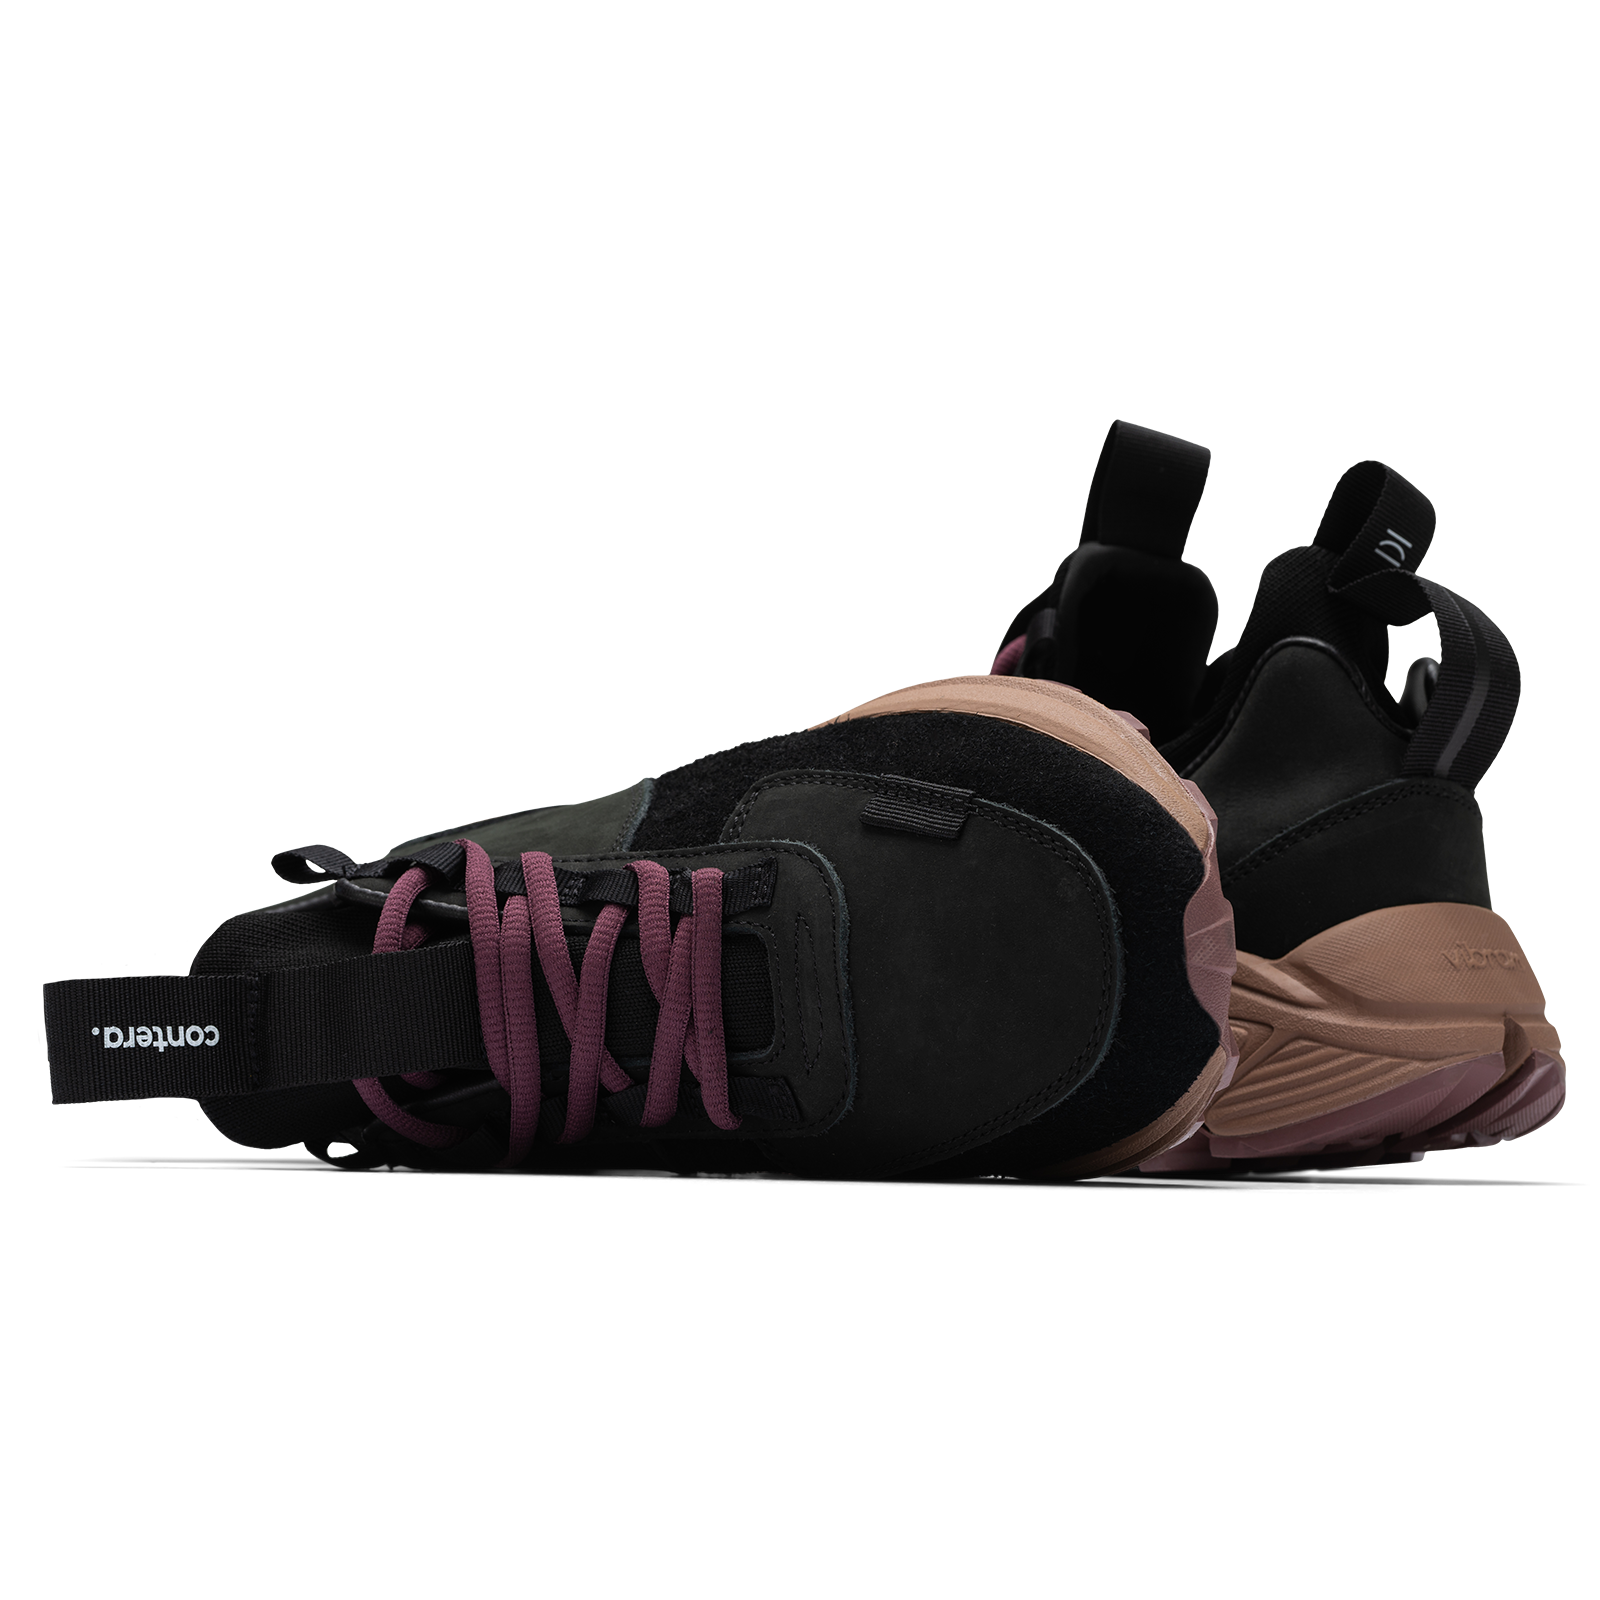 Top and back view, Contera Iron Oxide is a runner with Black suede and numbuck upper, stretch mesh internal bootie, webbing heel and tongue pulls, webbing lace holder, brown vibram midsole burgundy vibram rubber bottom.